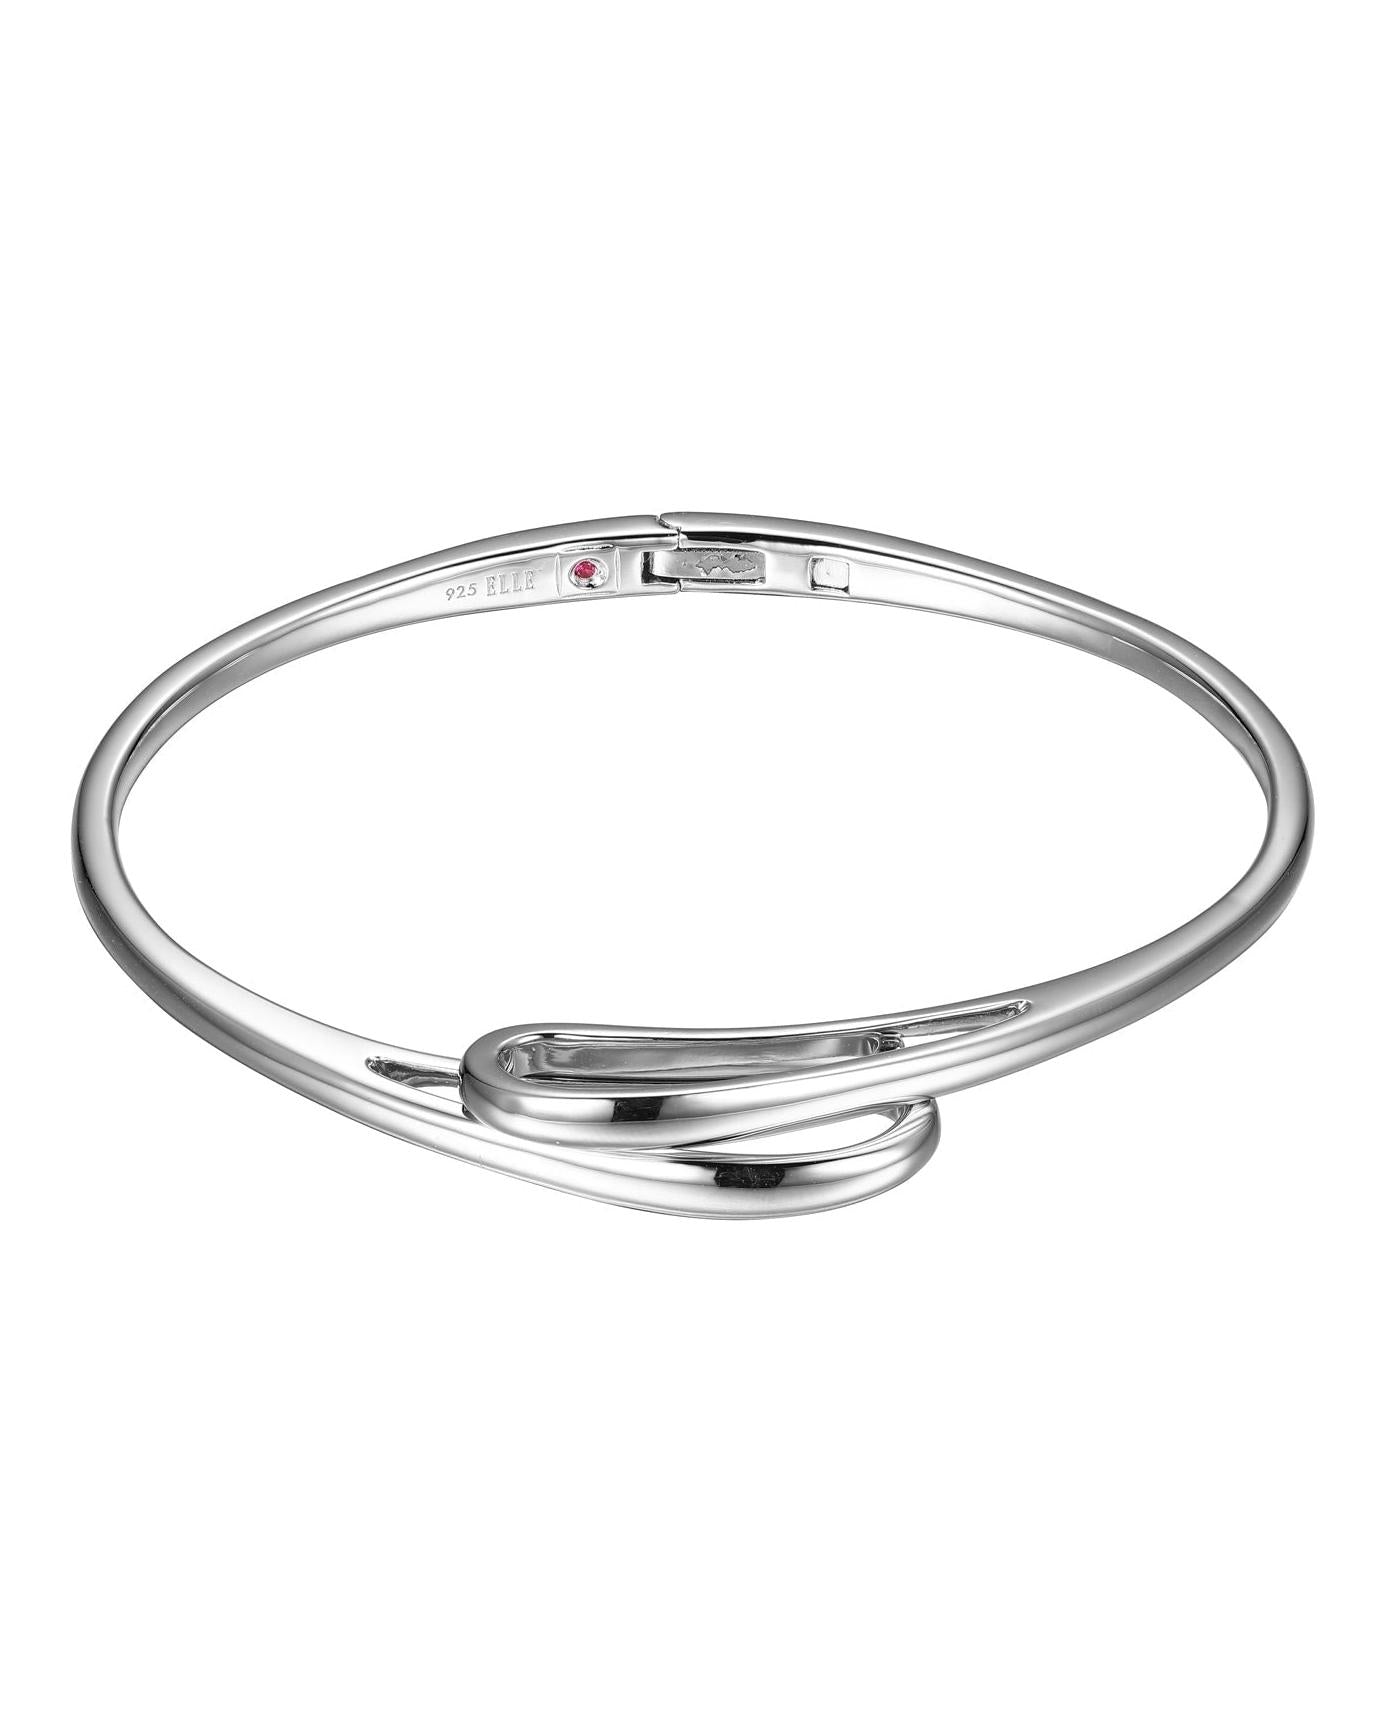 SS ELLE "EMBRACE" BANGLE IN RHODIUM PLATING. 6.75"